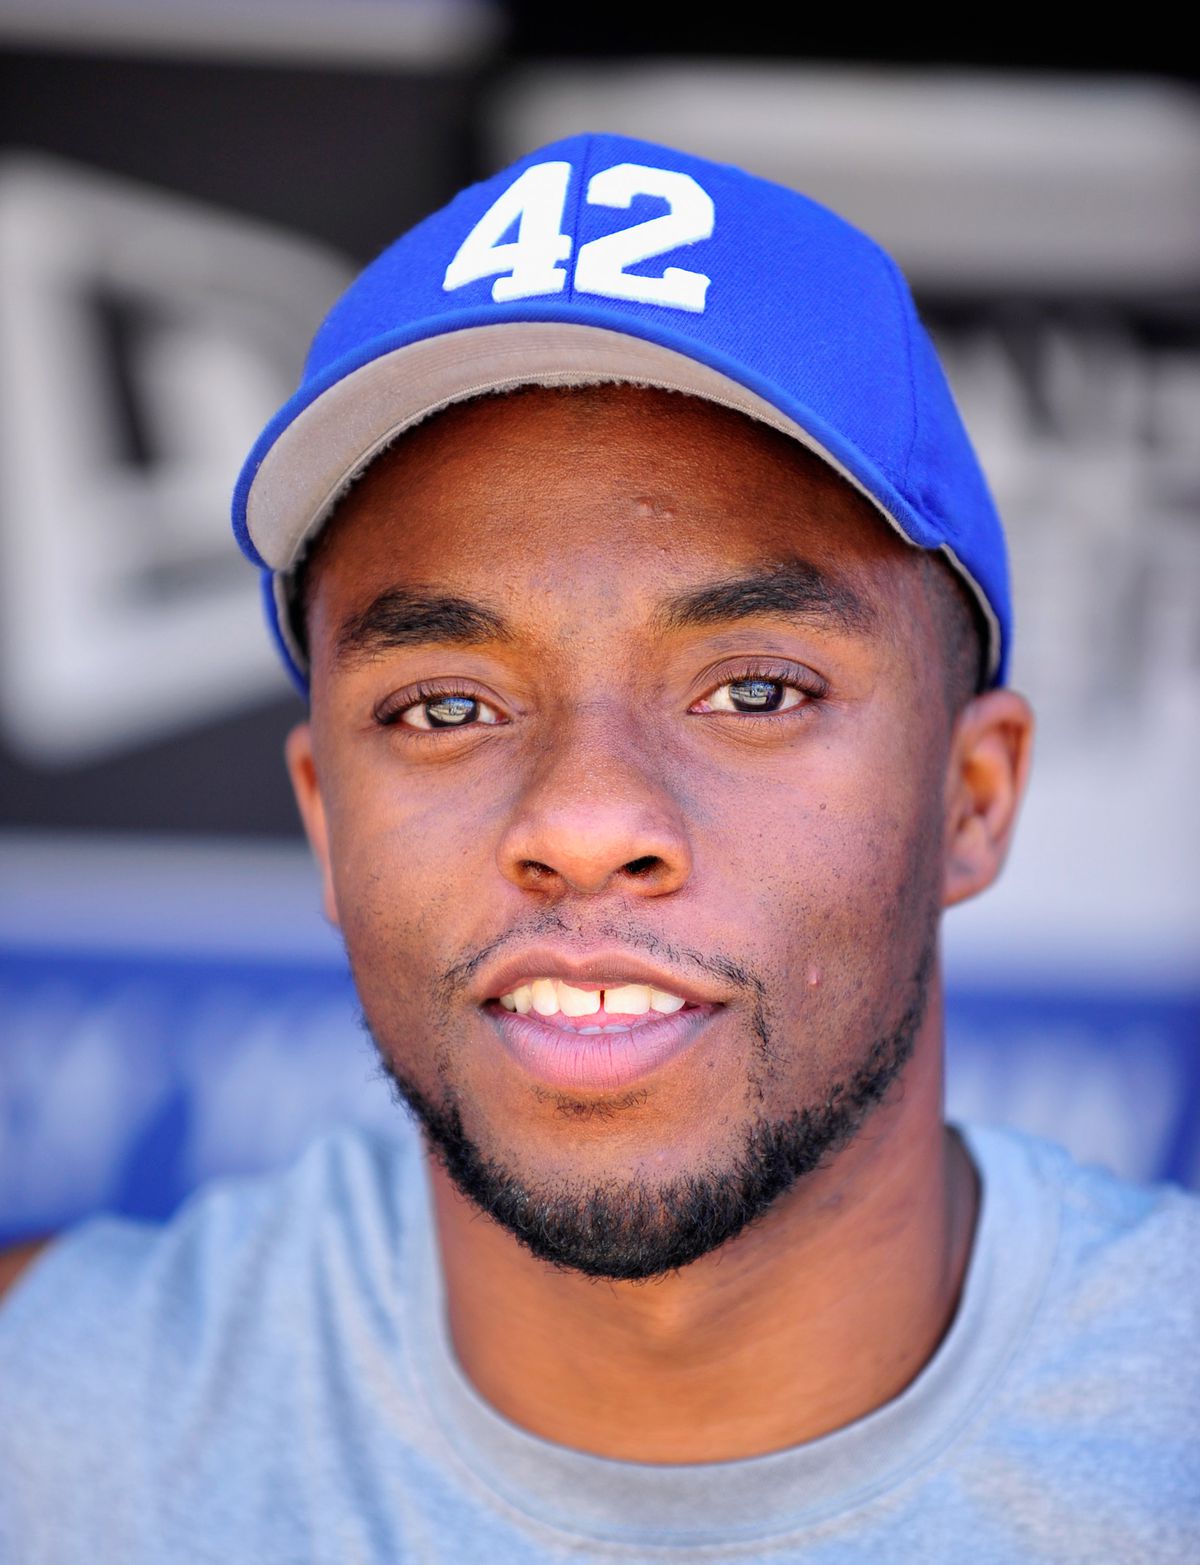 “42” Special Screening And Q&amp;A With Director And Stars At Dodger Stadium